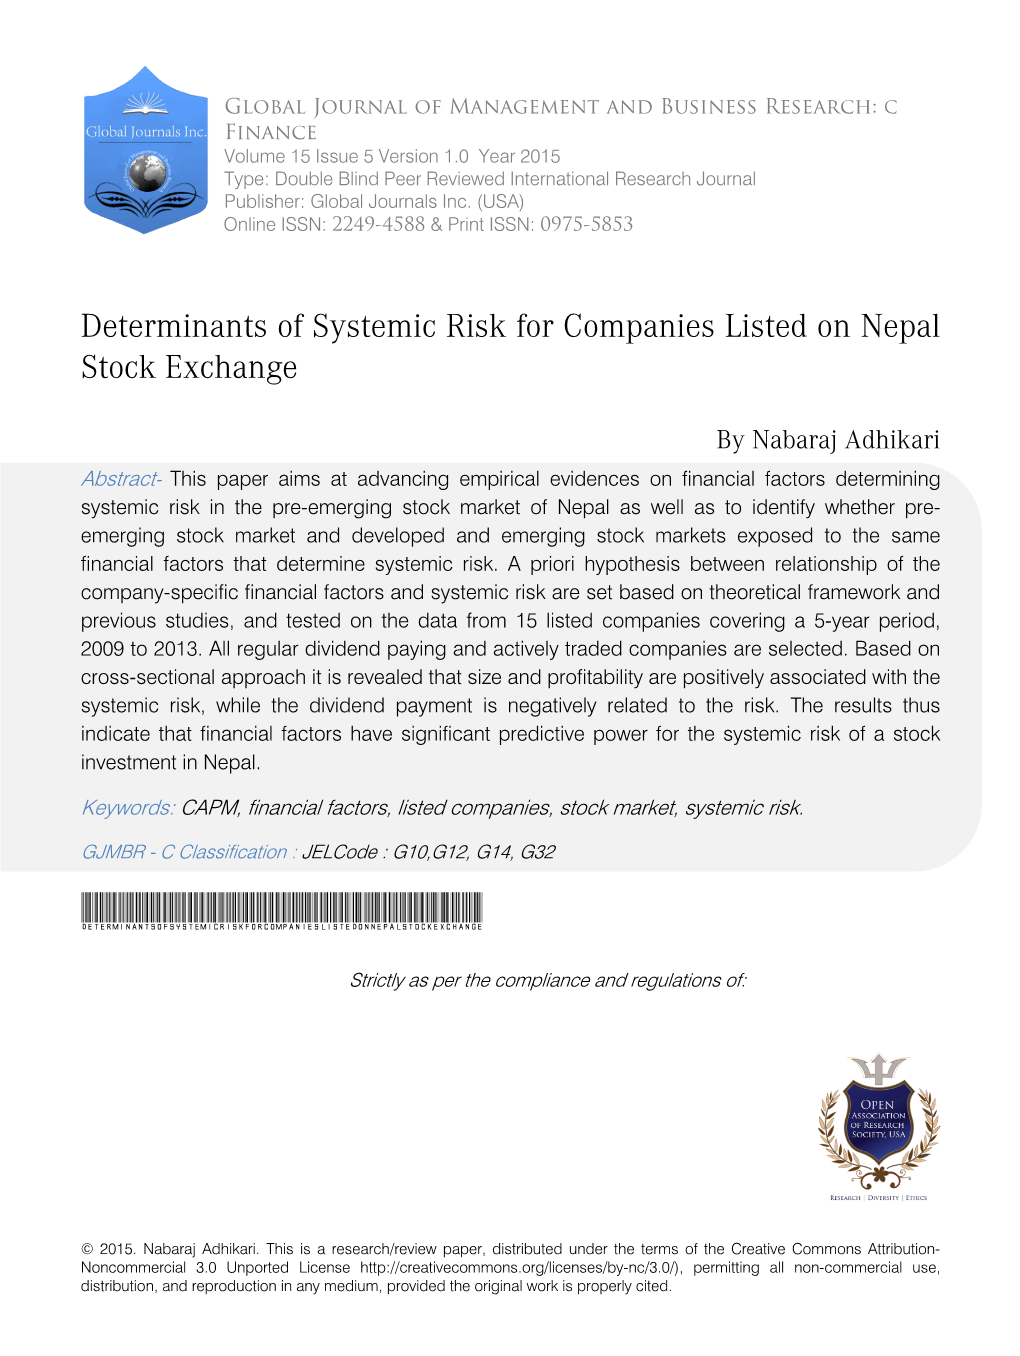 Determinants of Systemic Risk for Companies Listed on Nepal Stock Exchange